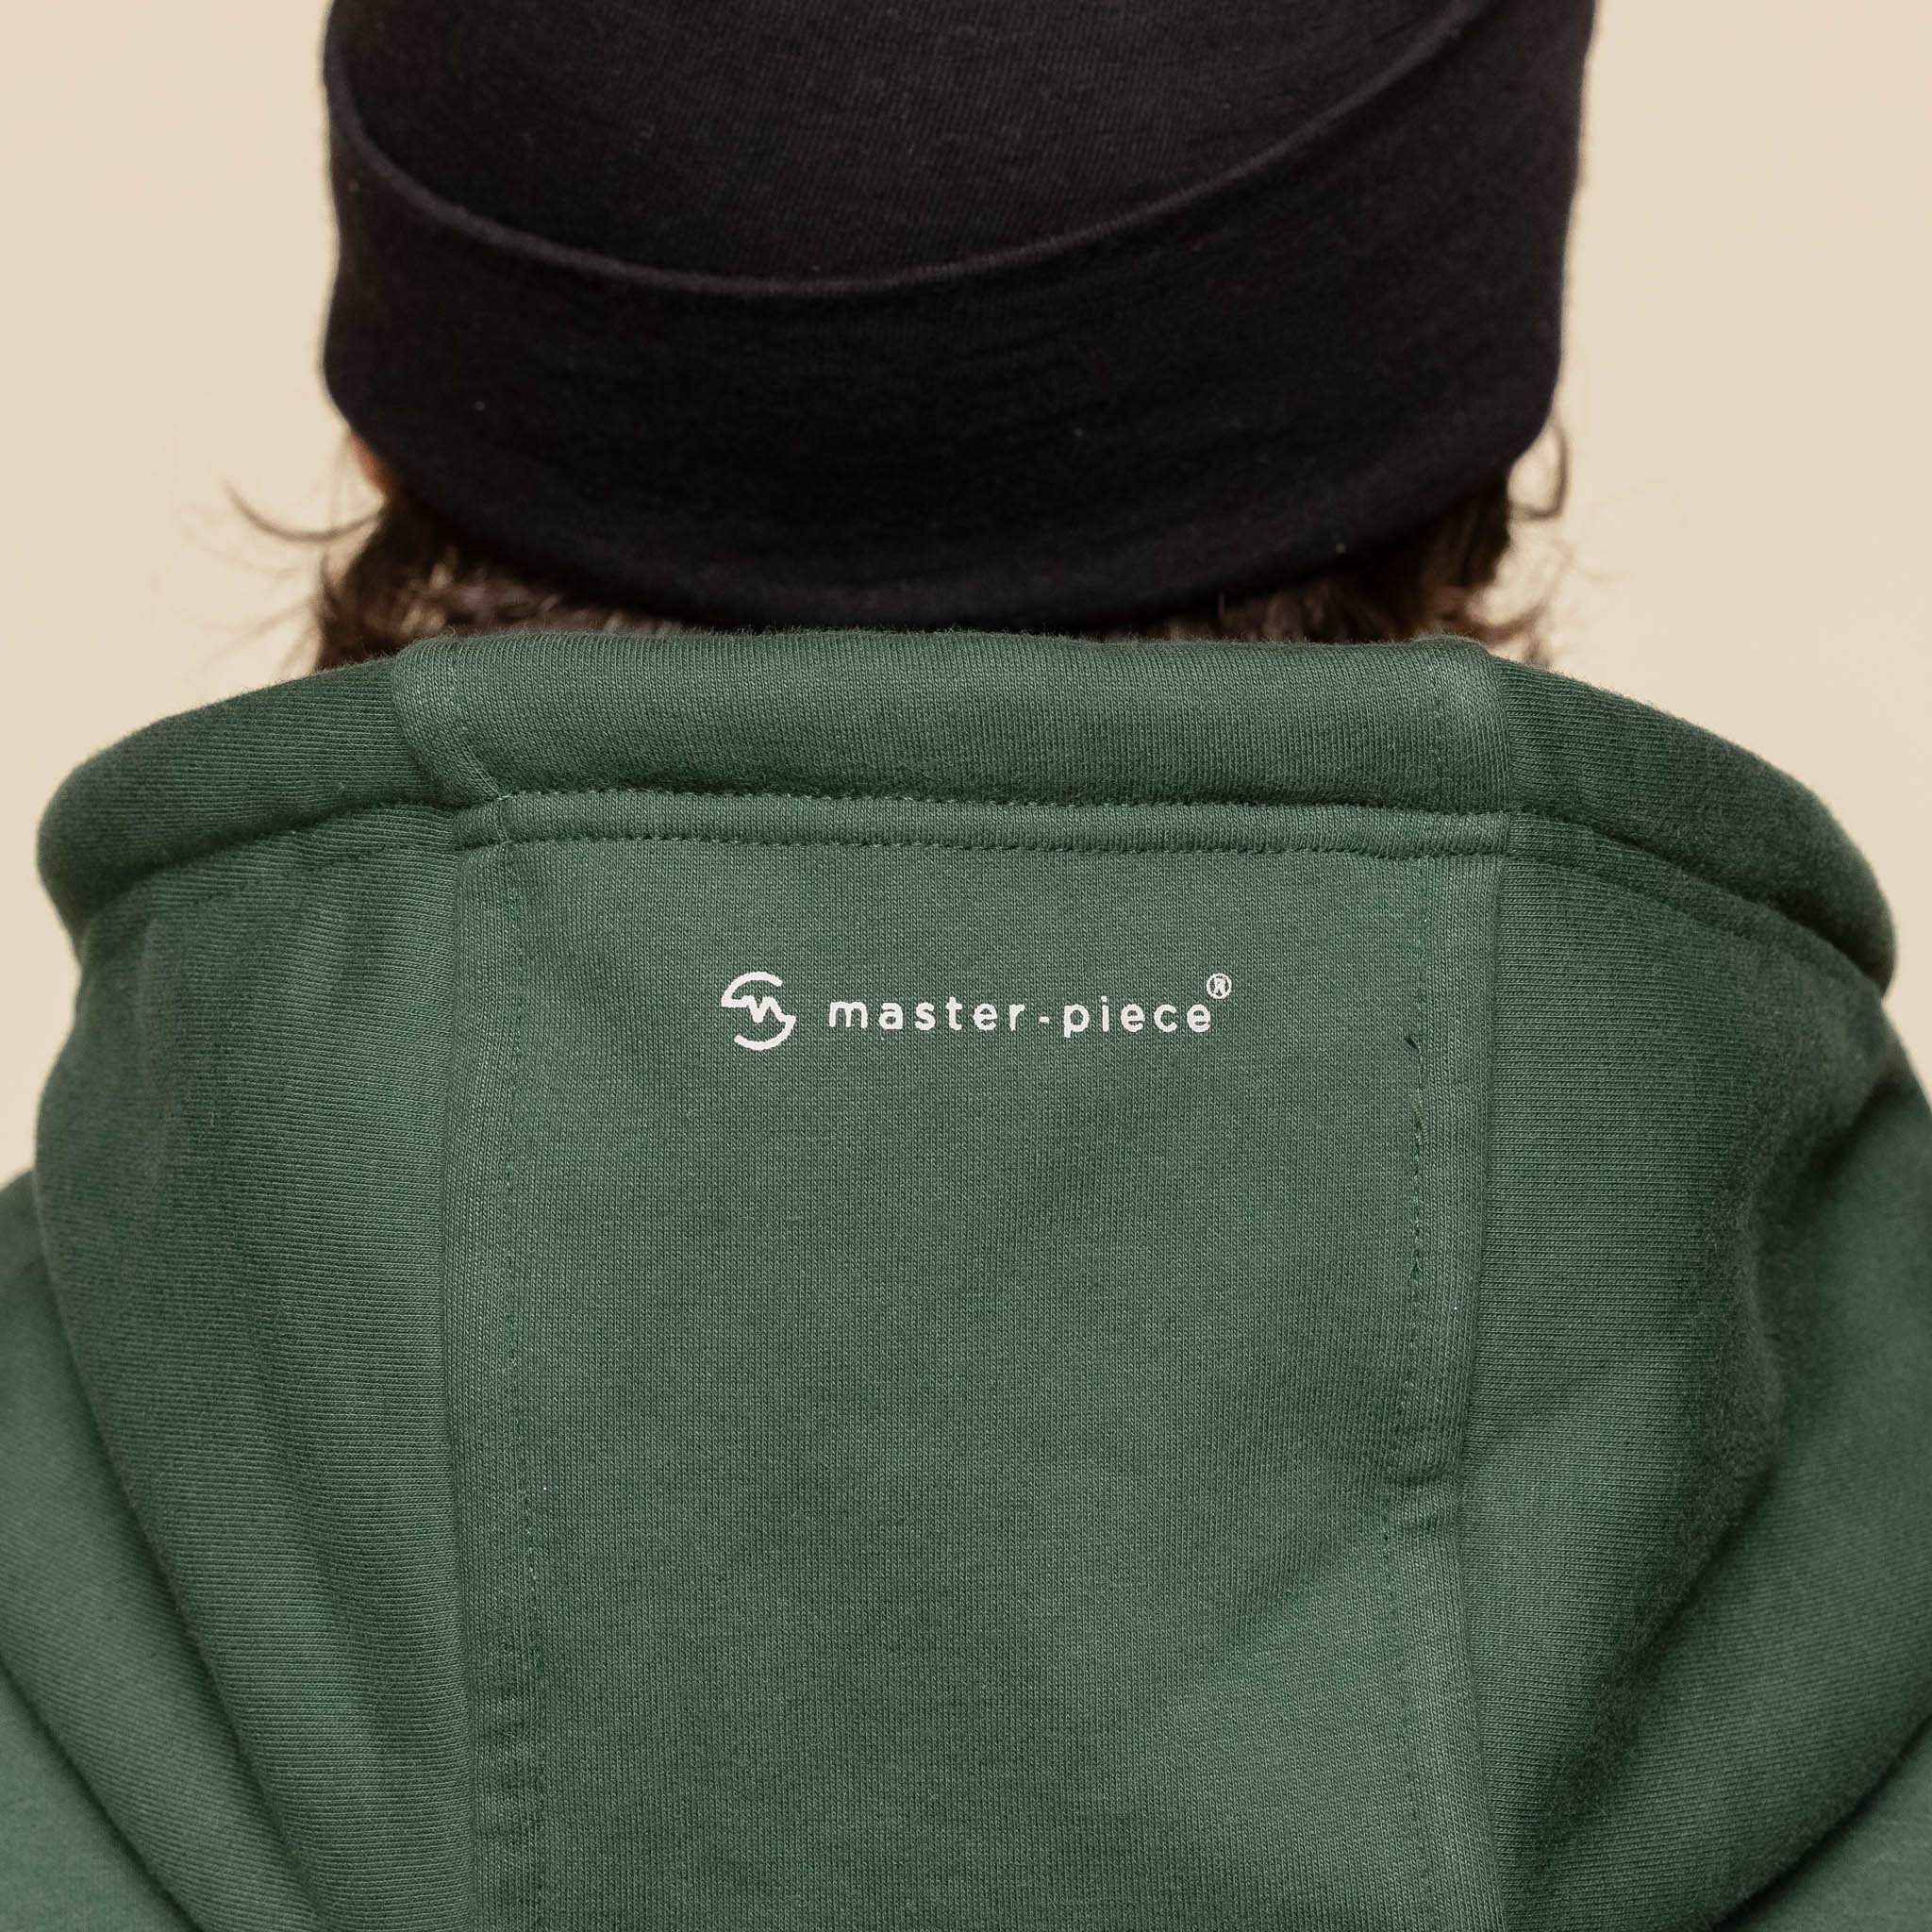 GOOPiMADE - “MEquip-H3” Mantle Logo Hooded Jacket - Green